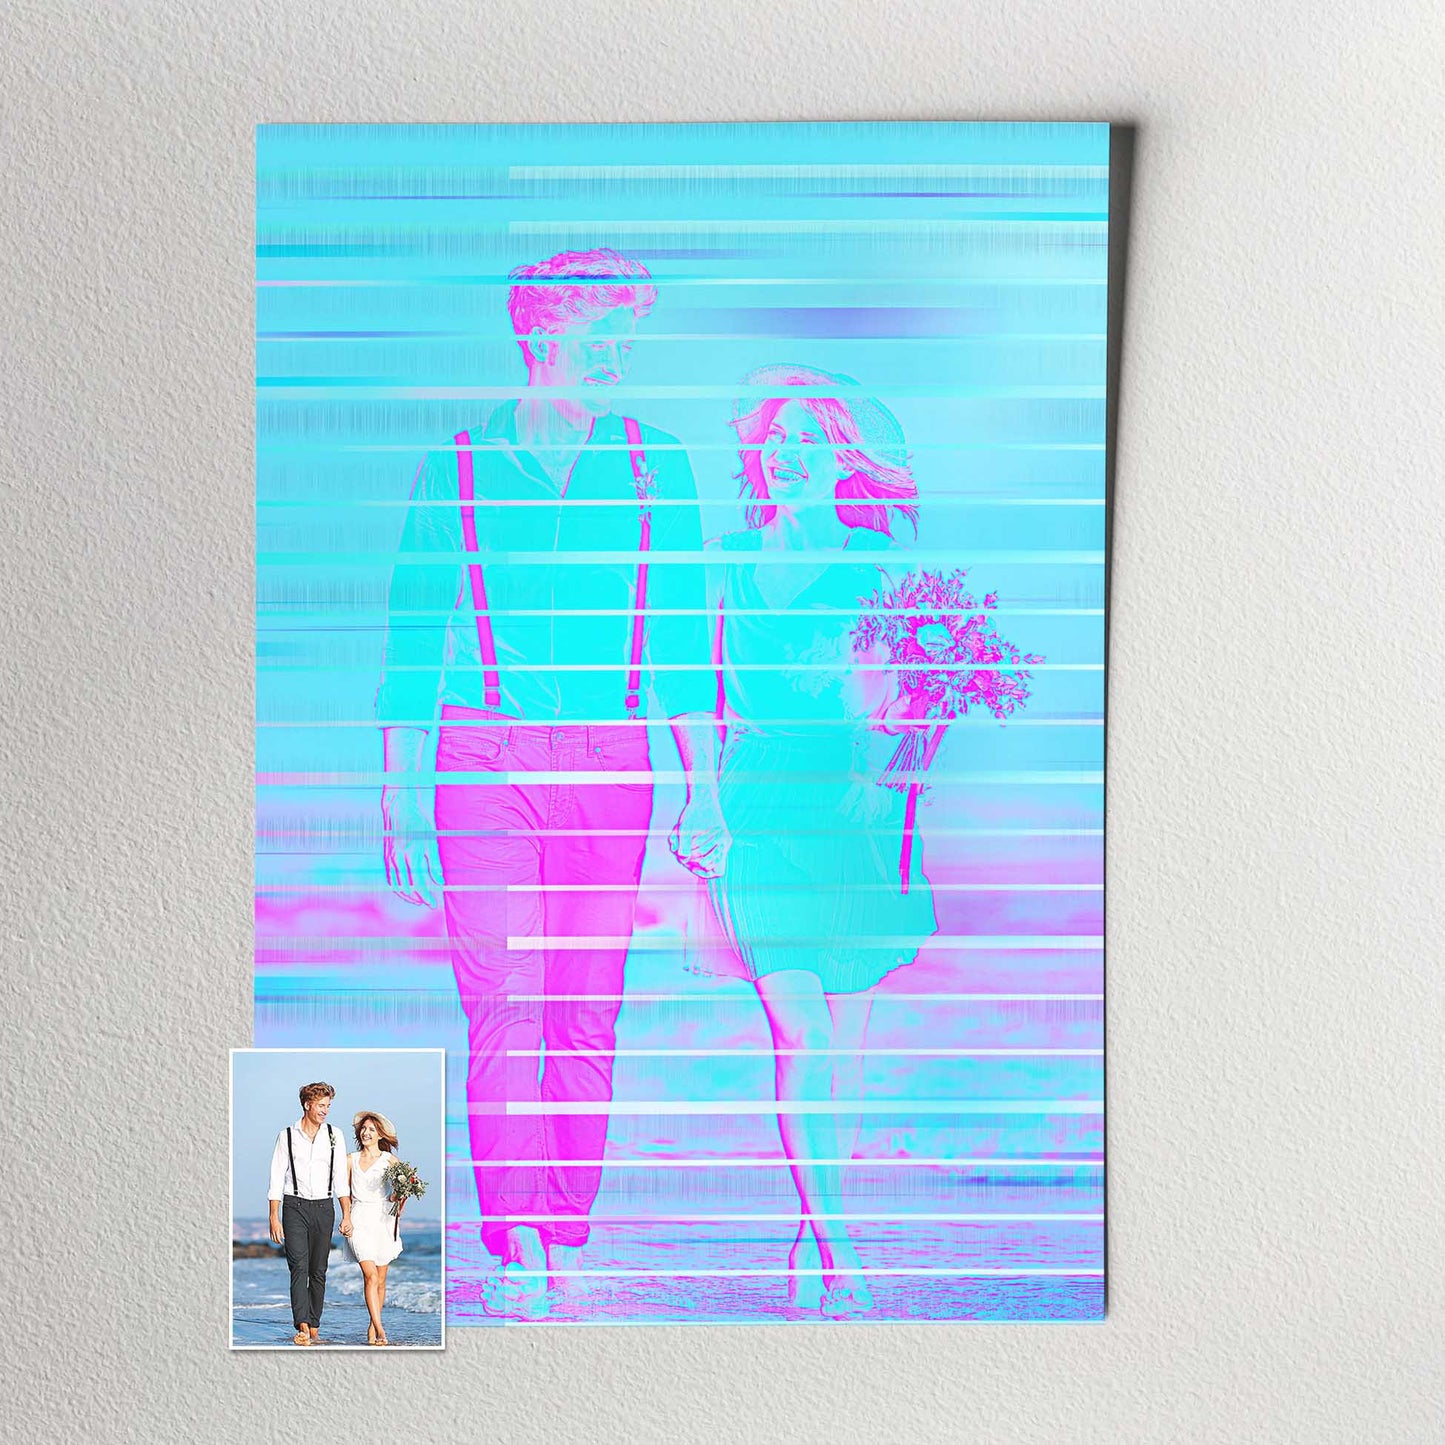 Home & Office Decor Accessory: Add a touch of artistic flair to your living or workspace with this personalized print. Its modern design and captivating colors make it an ideal decor accessory